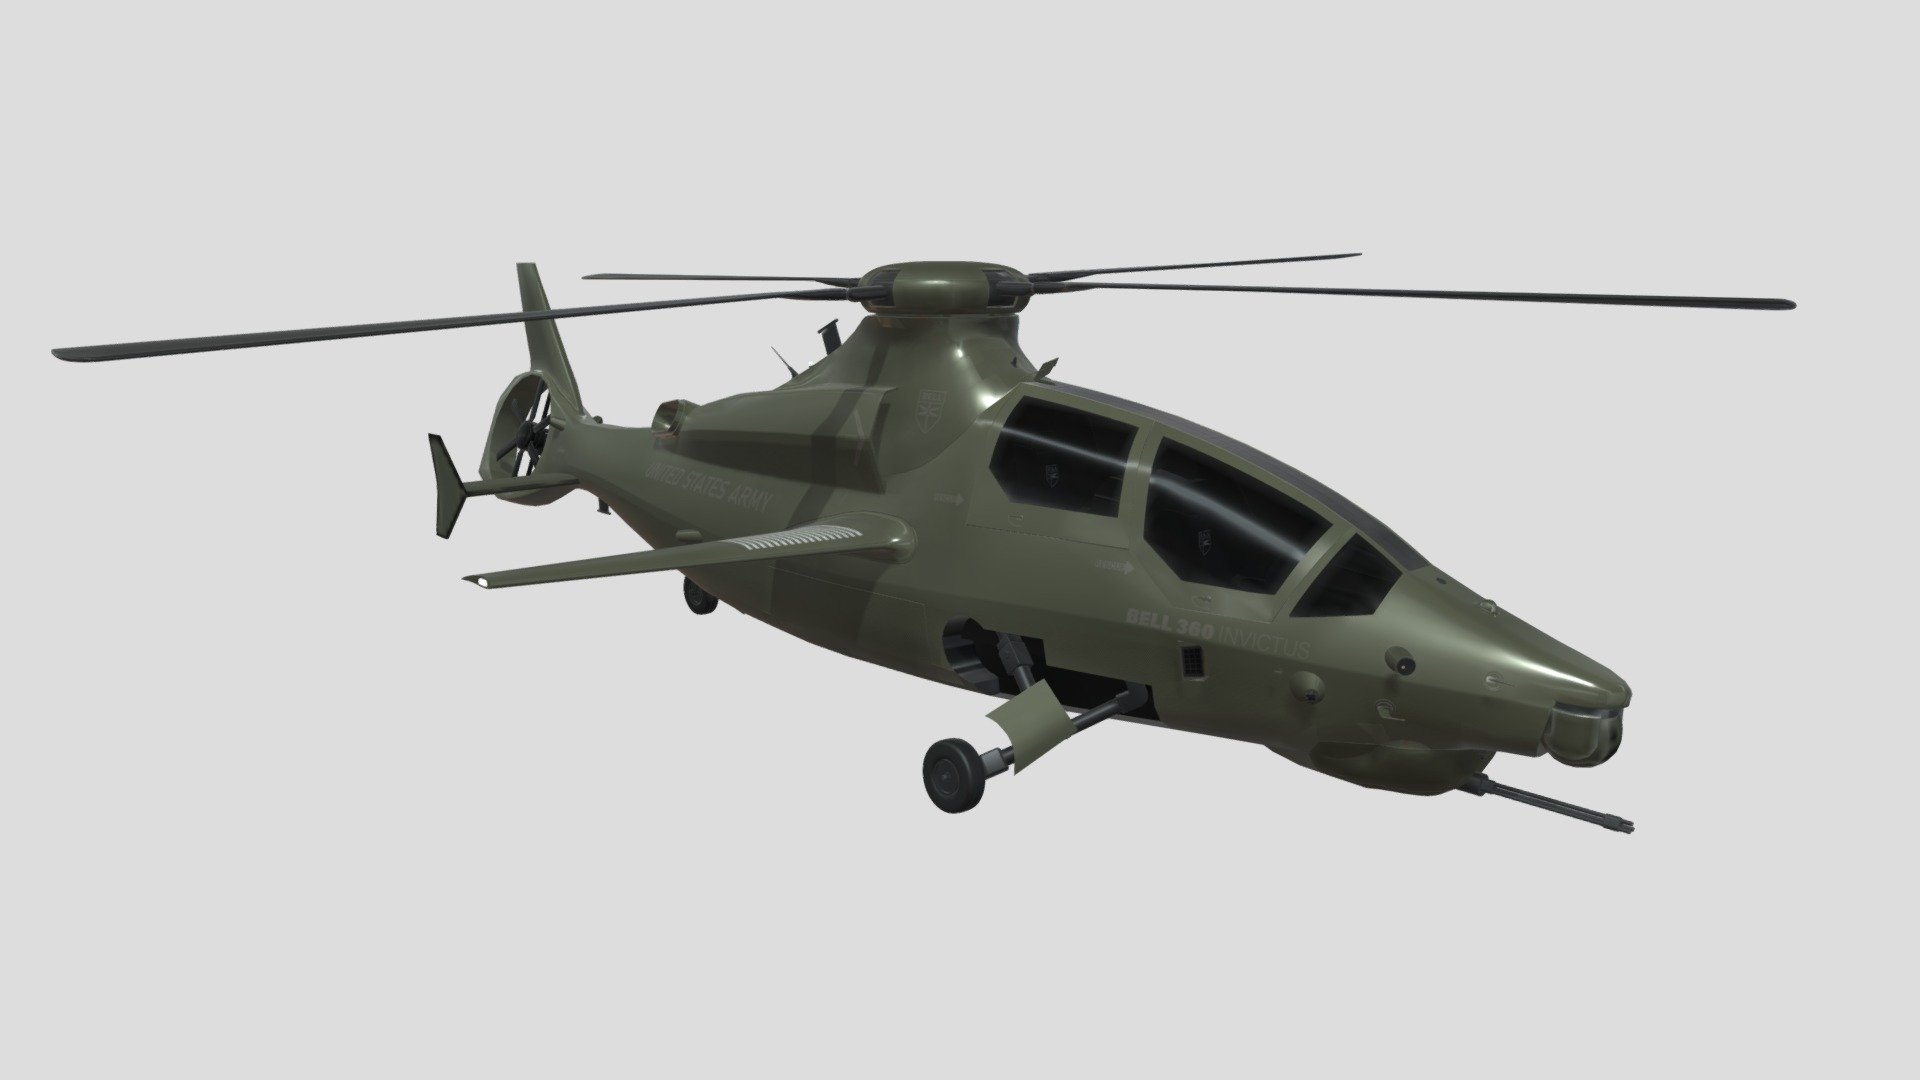 BELL 360 INVICTUS

The Bell 360 Invictus was a proposed helicopter design intended to meet the United States Army requirement for a Future Attack Reconnaissance Aircraft.

Includes:




The Bell 360 Invictus helicopter model.

Model Textures.

Polygons: 48,871
Vertices:  55,846

Textures size - 4096 x 4096
Texture map types:




Base Color

Normal

Roughness

Metallic

Emissive
 - BELL 360 INVICTUS - 3D model by Monnapse 3d model